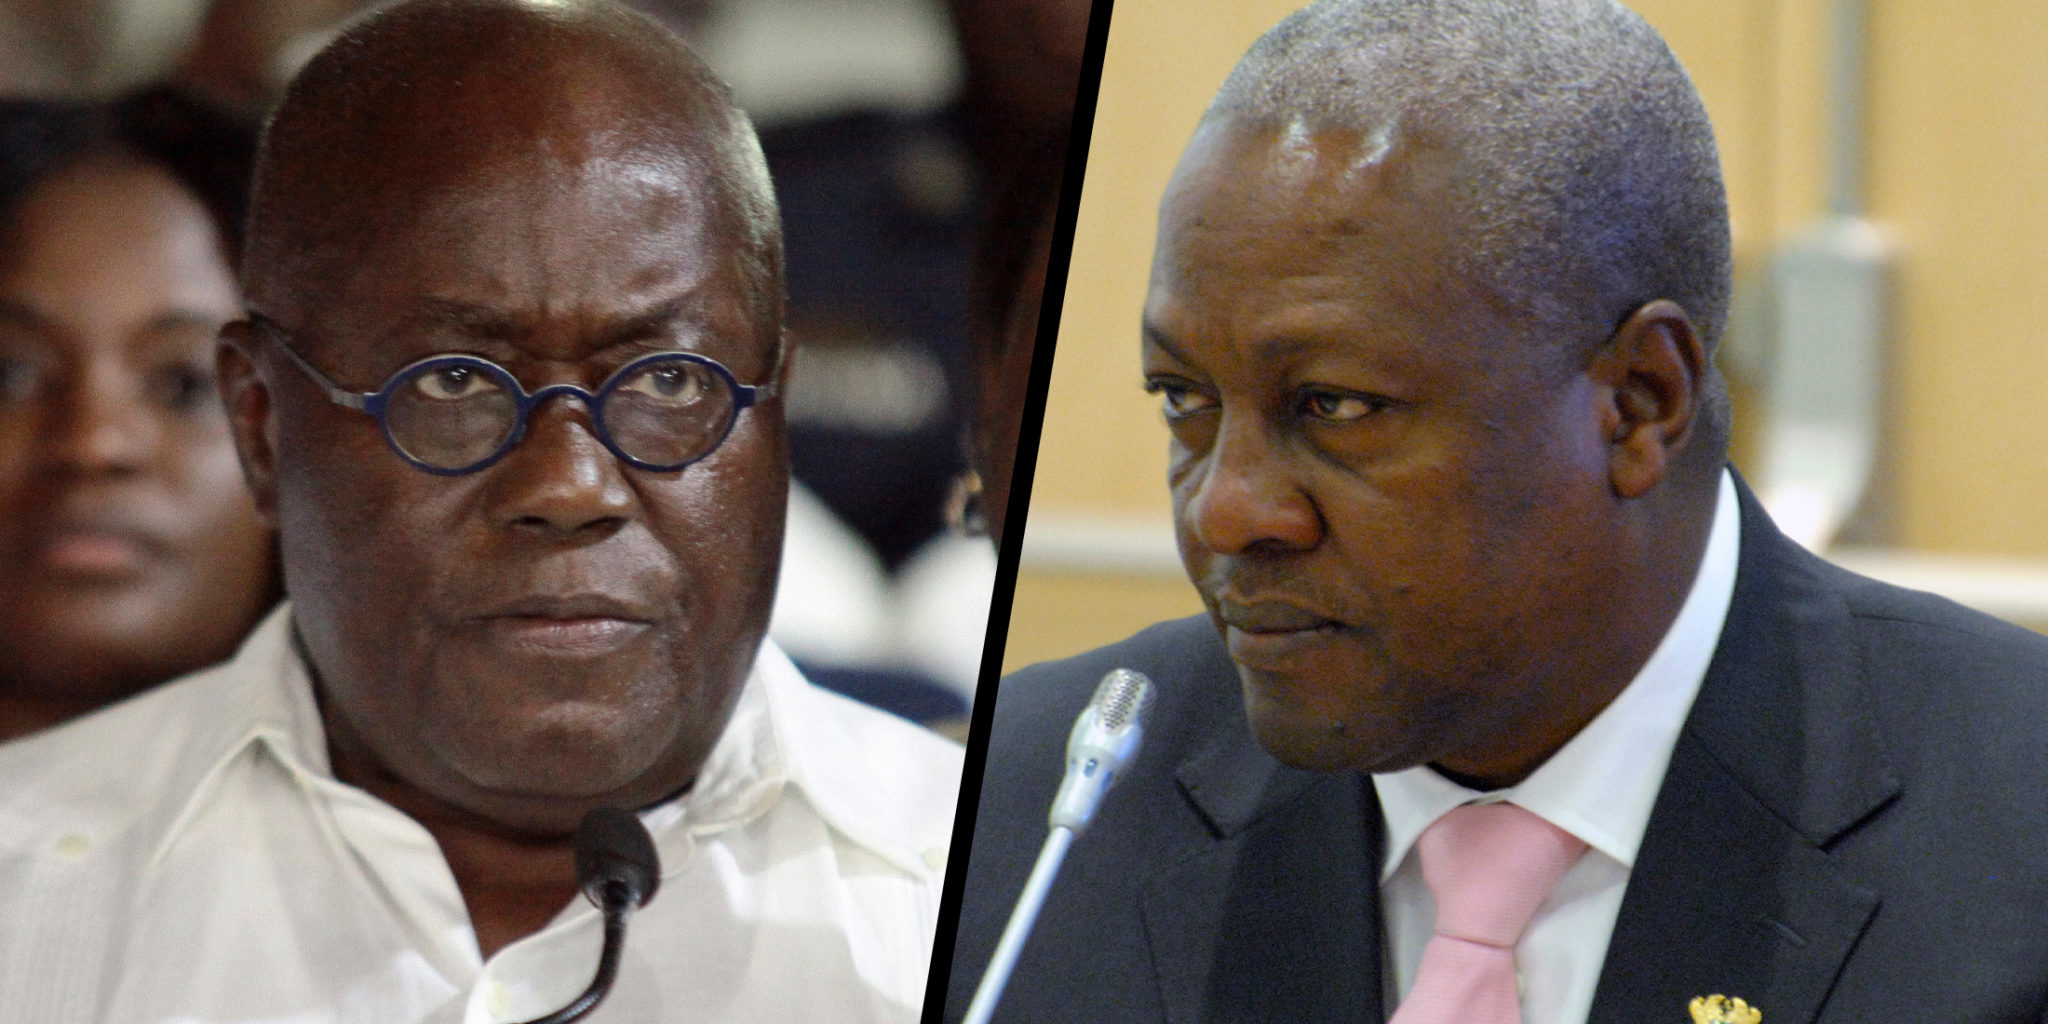 Ghana's election: A play for change or continuity